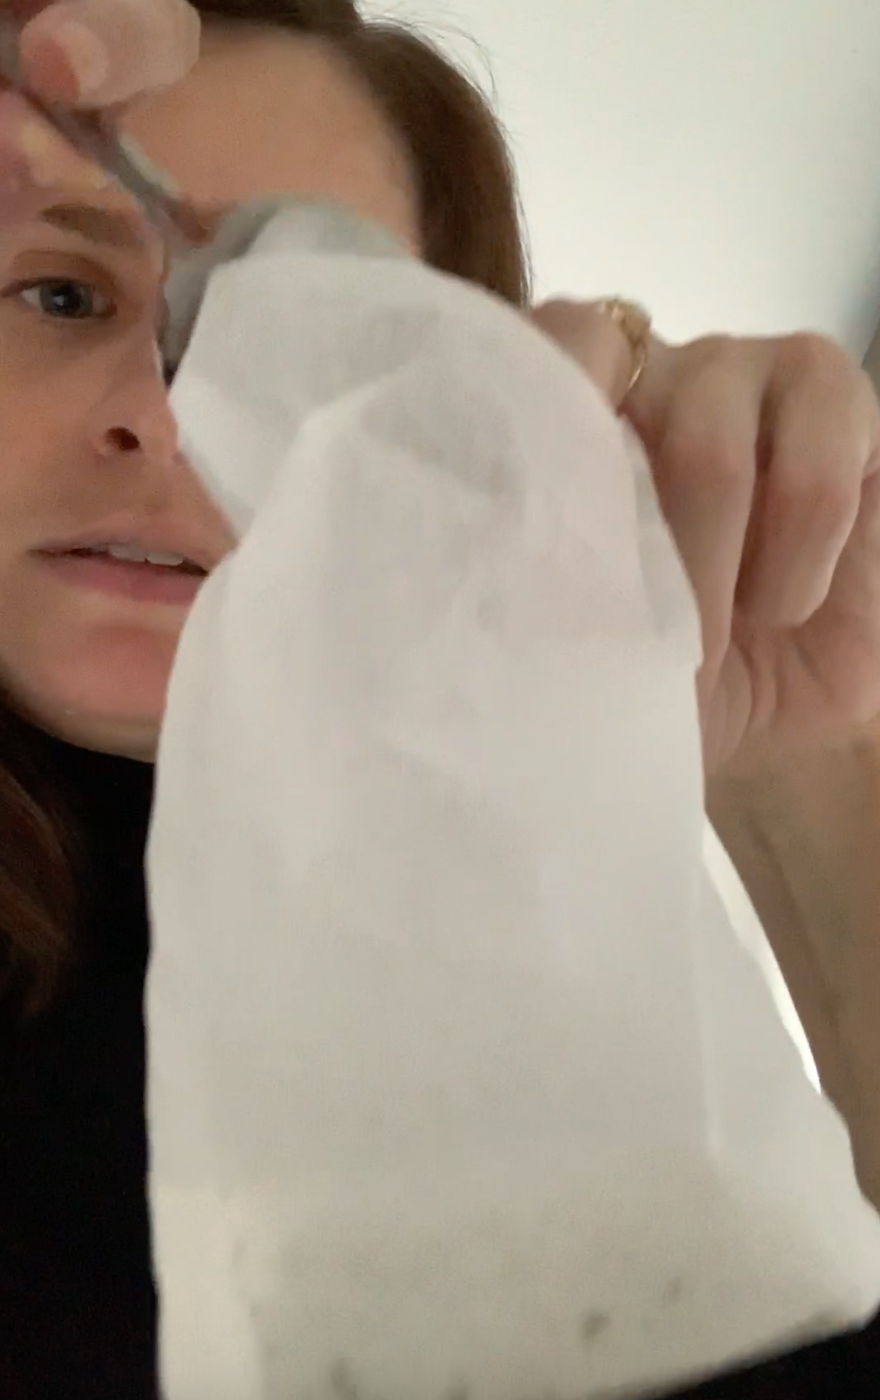 A woman with brown hair uses a spoon to put loose leaf tea in a white tea filter bag